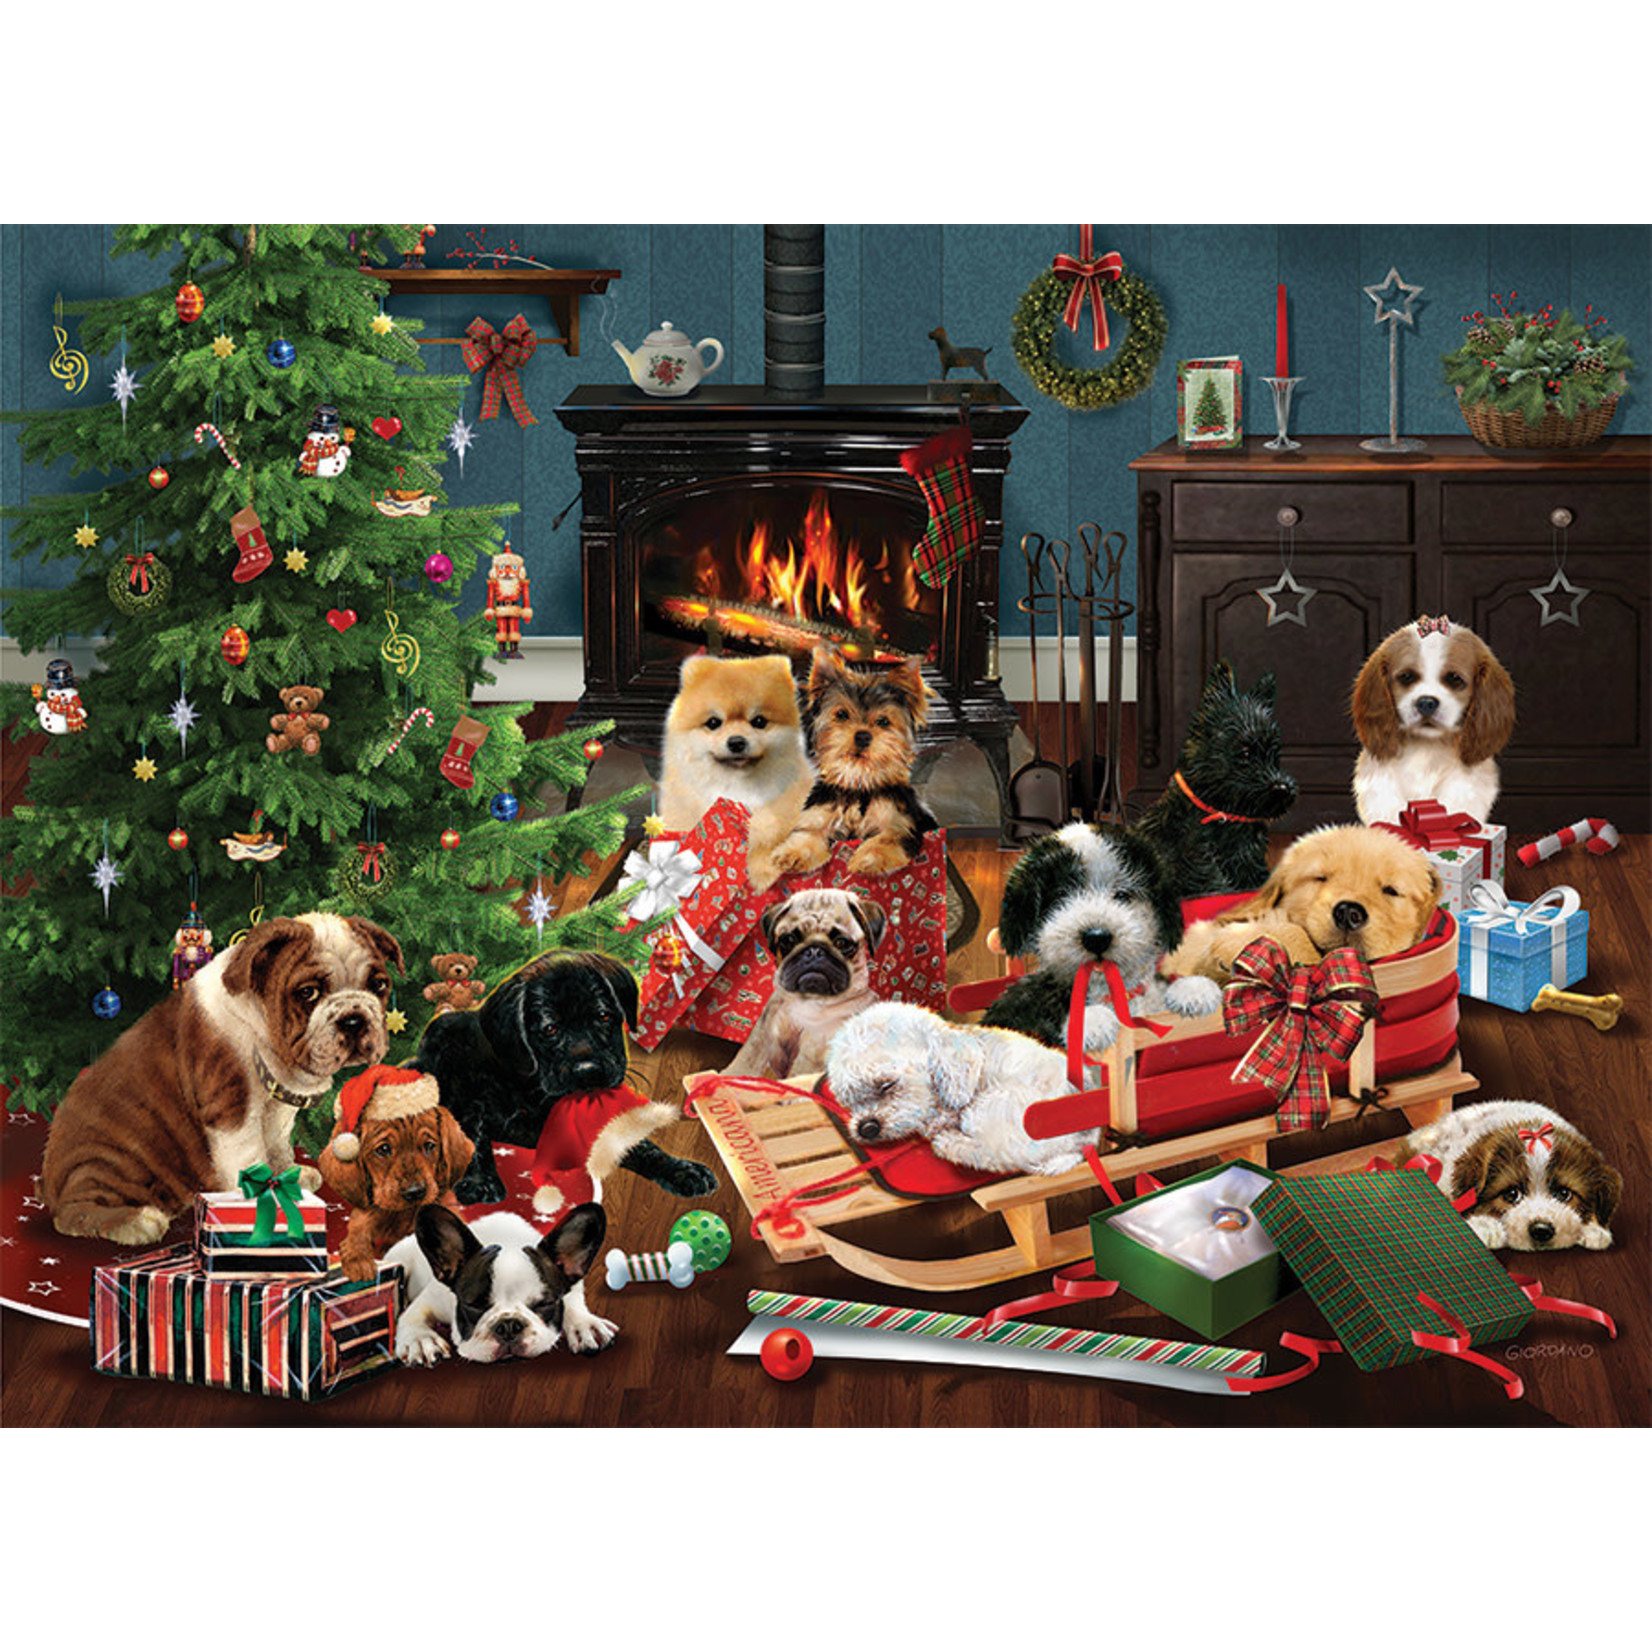 Cobble Hill Christmas Puppies Puzzle 1000 piece